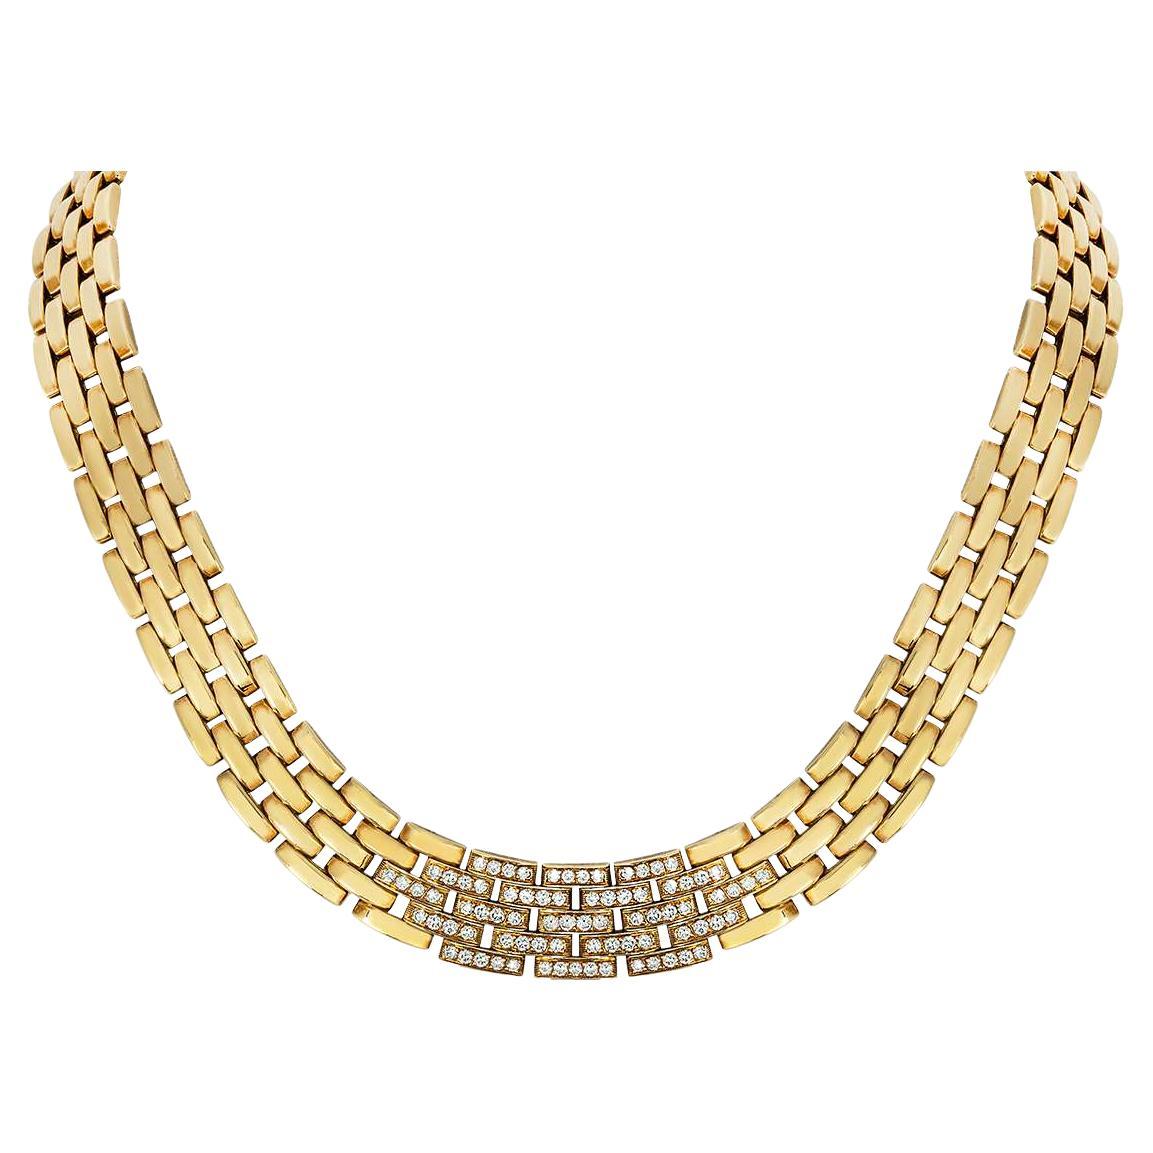 Cartier Gelbgold Maillon Panthere Diamant-Halskette